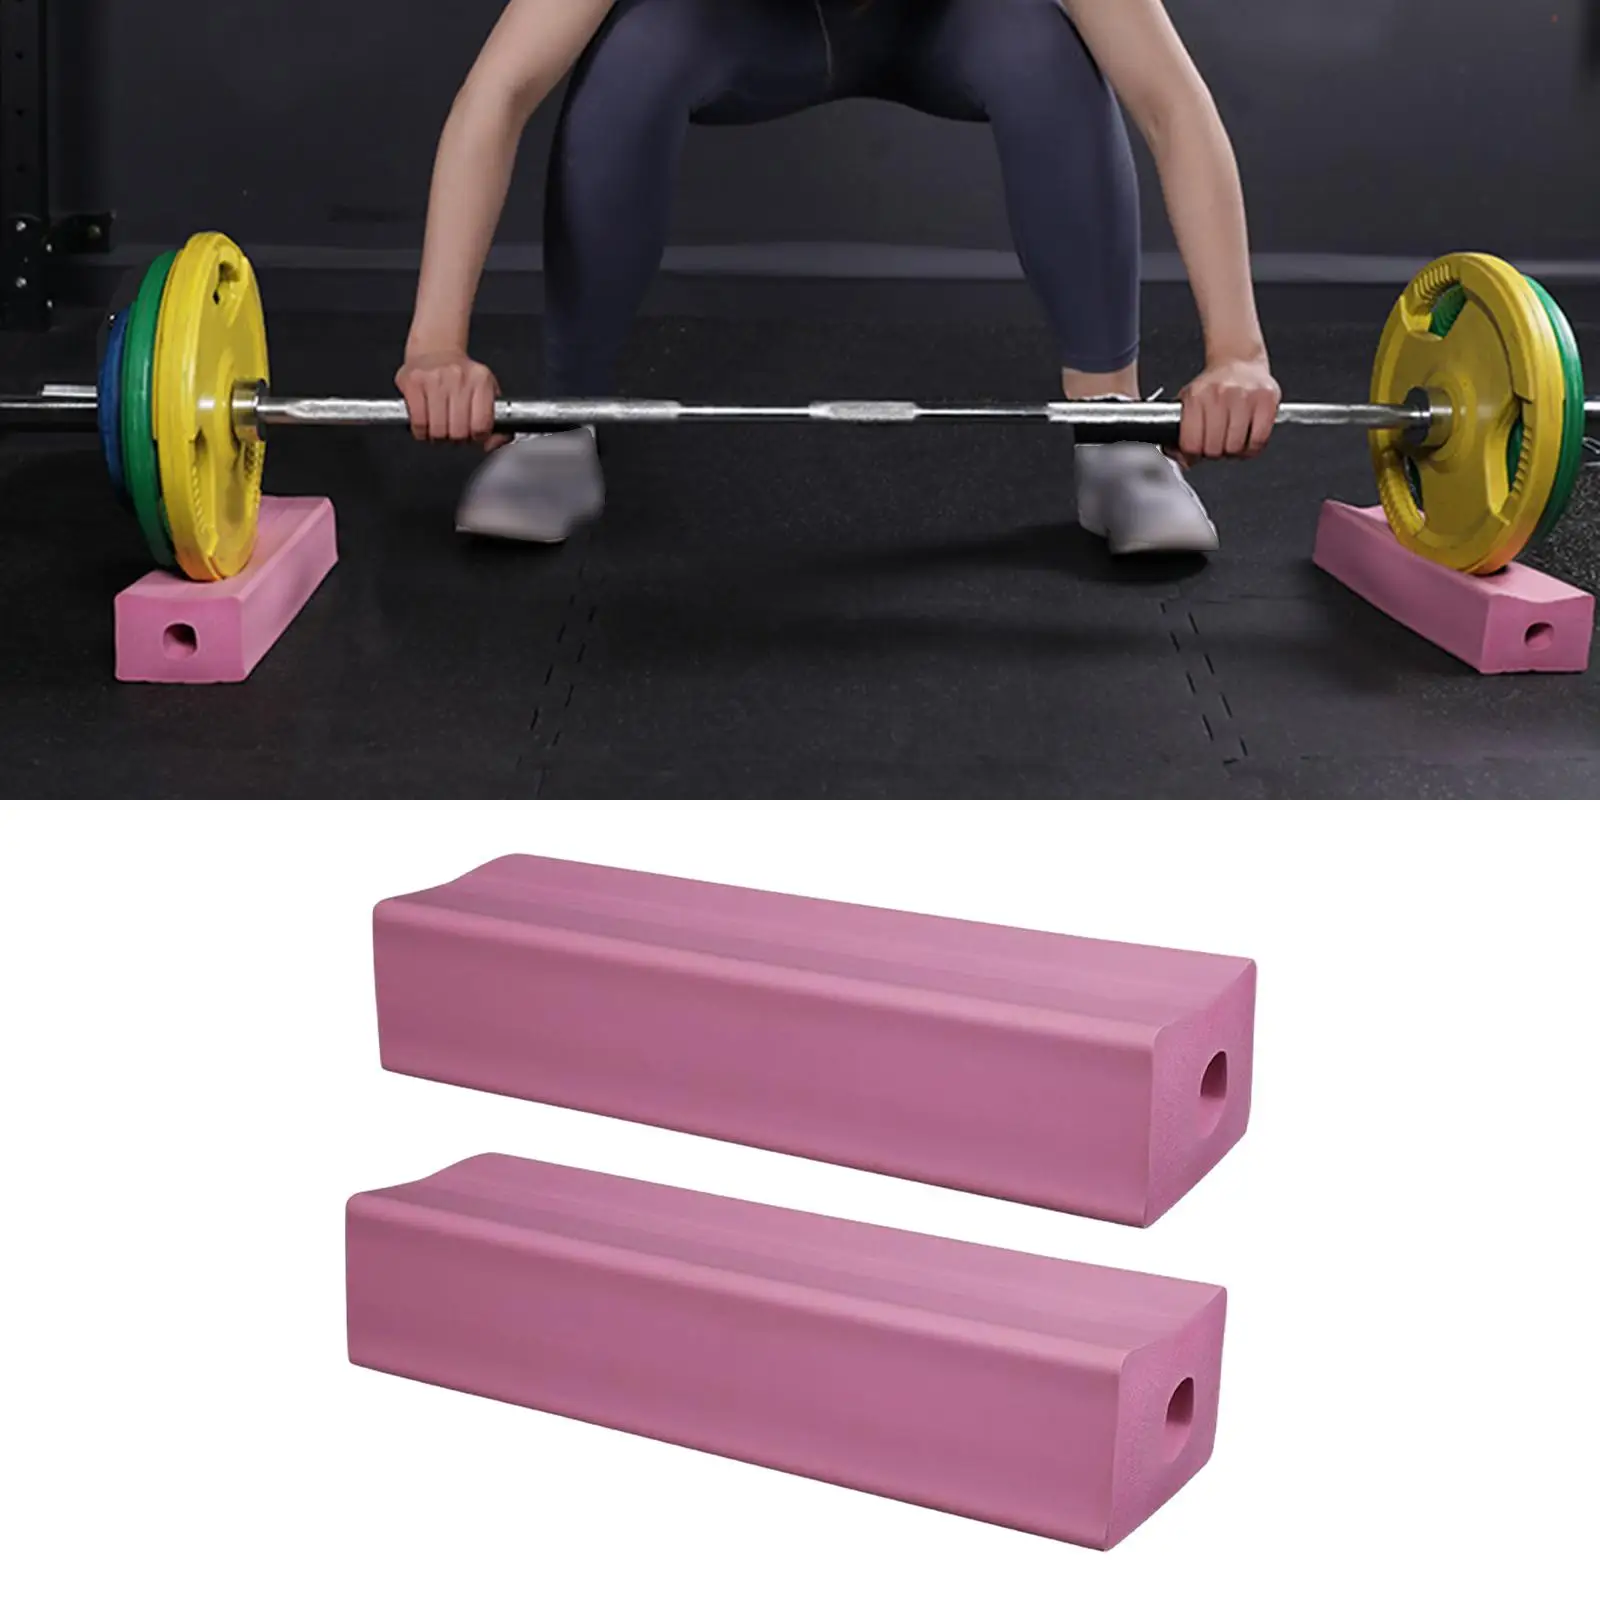 Barbell Crash Pad Tear Resistance Weight Lifting Drop Pads for Weightlifting Training